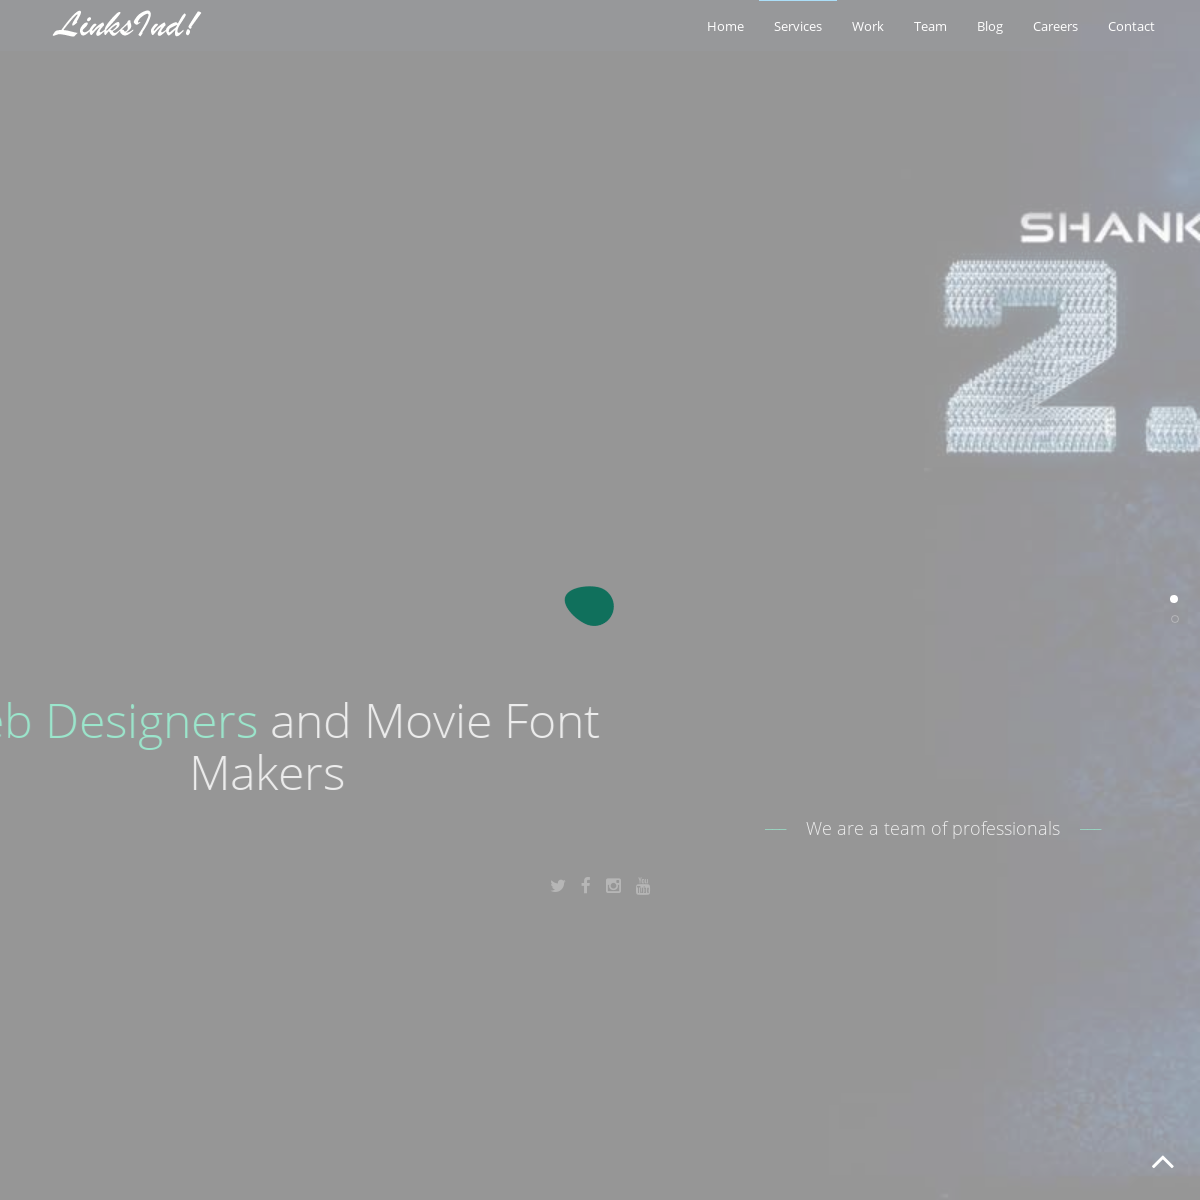 Linksind Web Designers And Movie Font Makers Archived 21 06 08